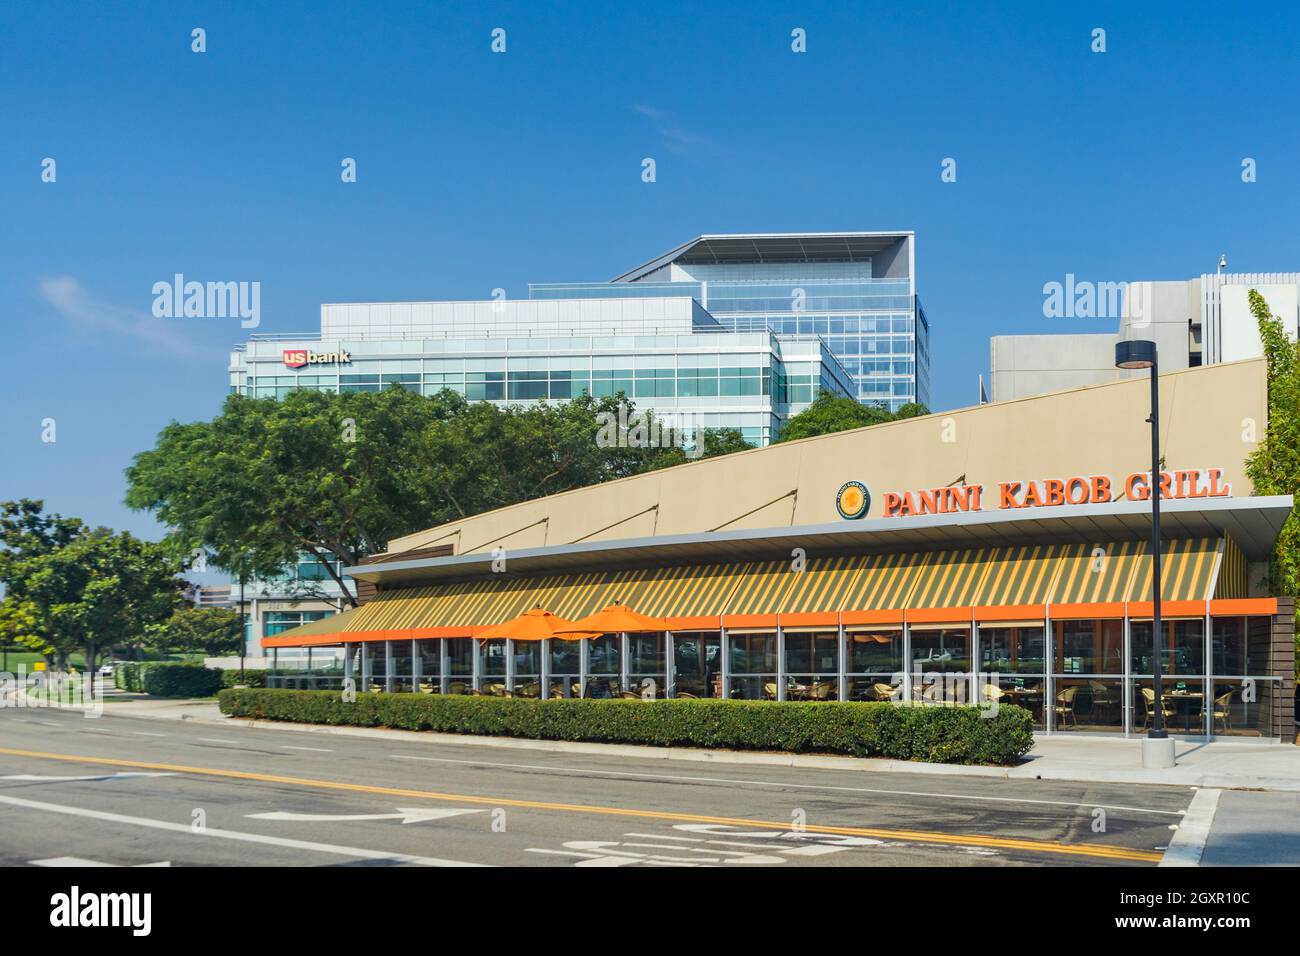 Irvine, CA, USA – August 16, 2021: Street view of Panini Kabob Grill and US Bank in the planned community of Irvine, California. Stock Photo